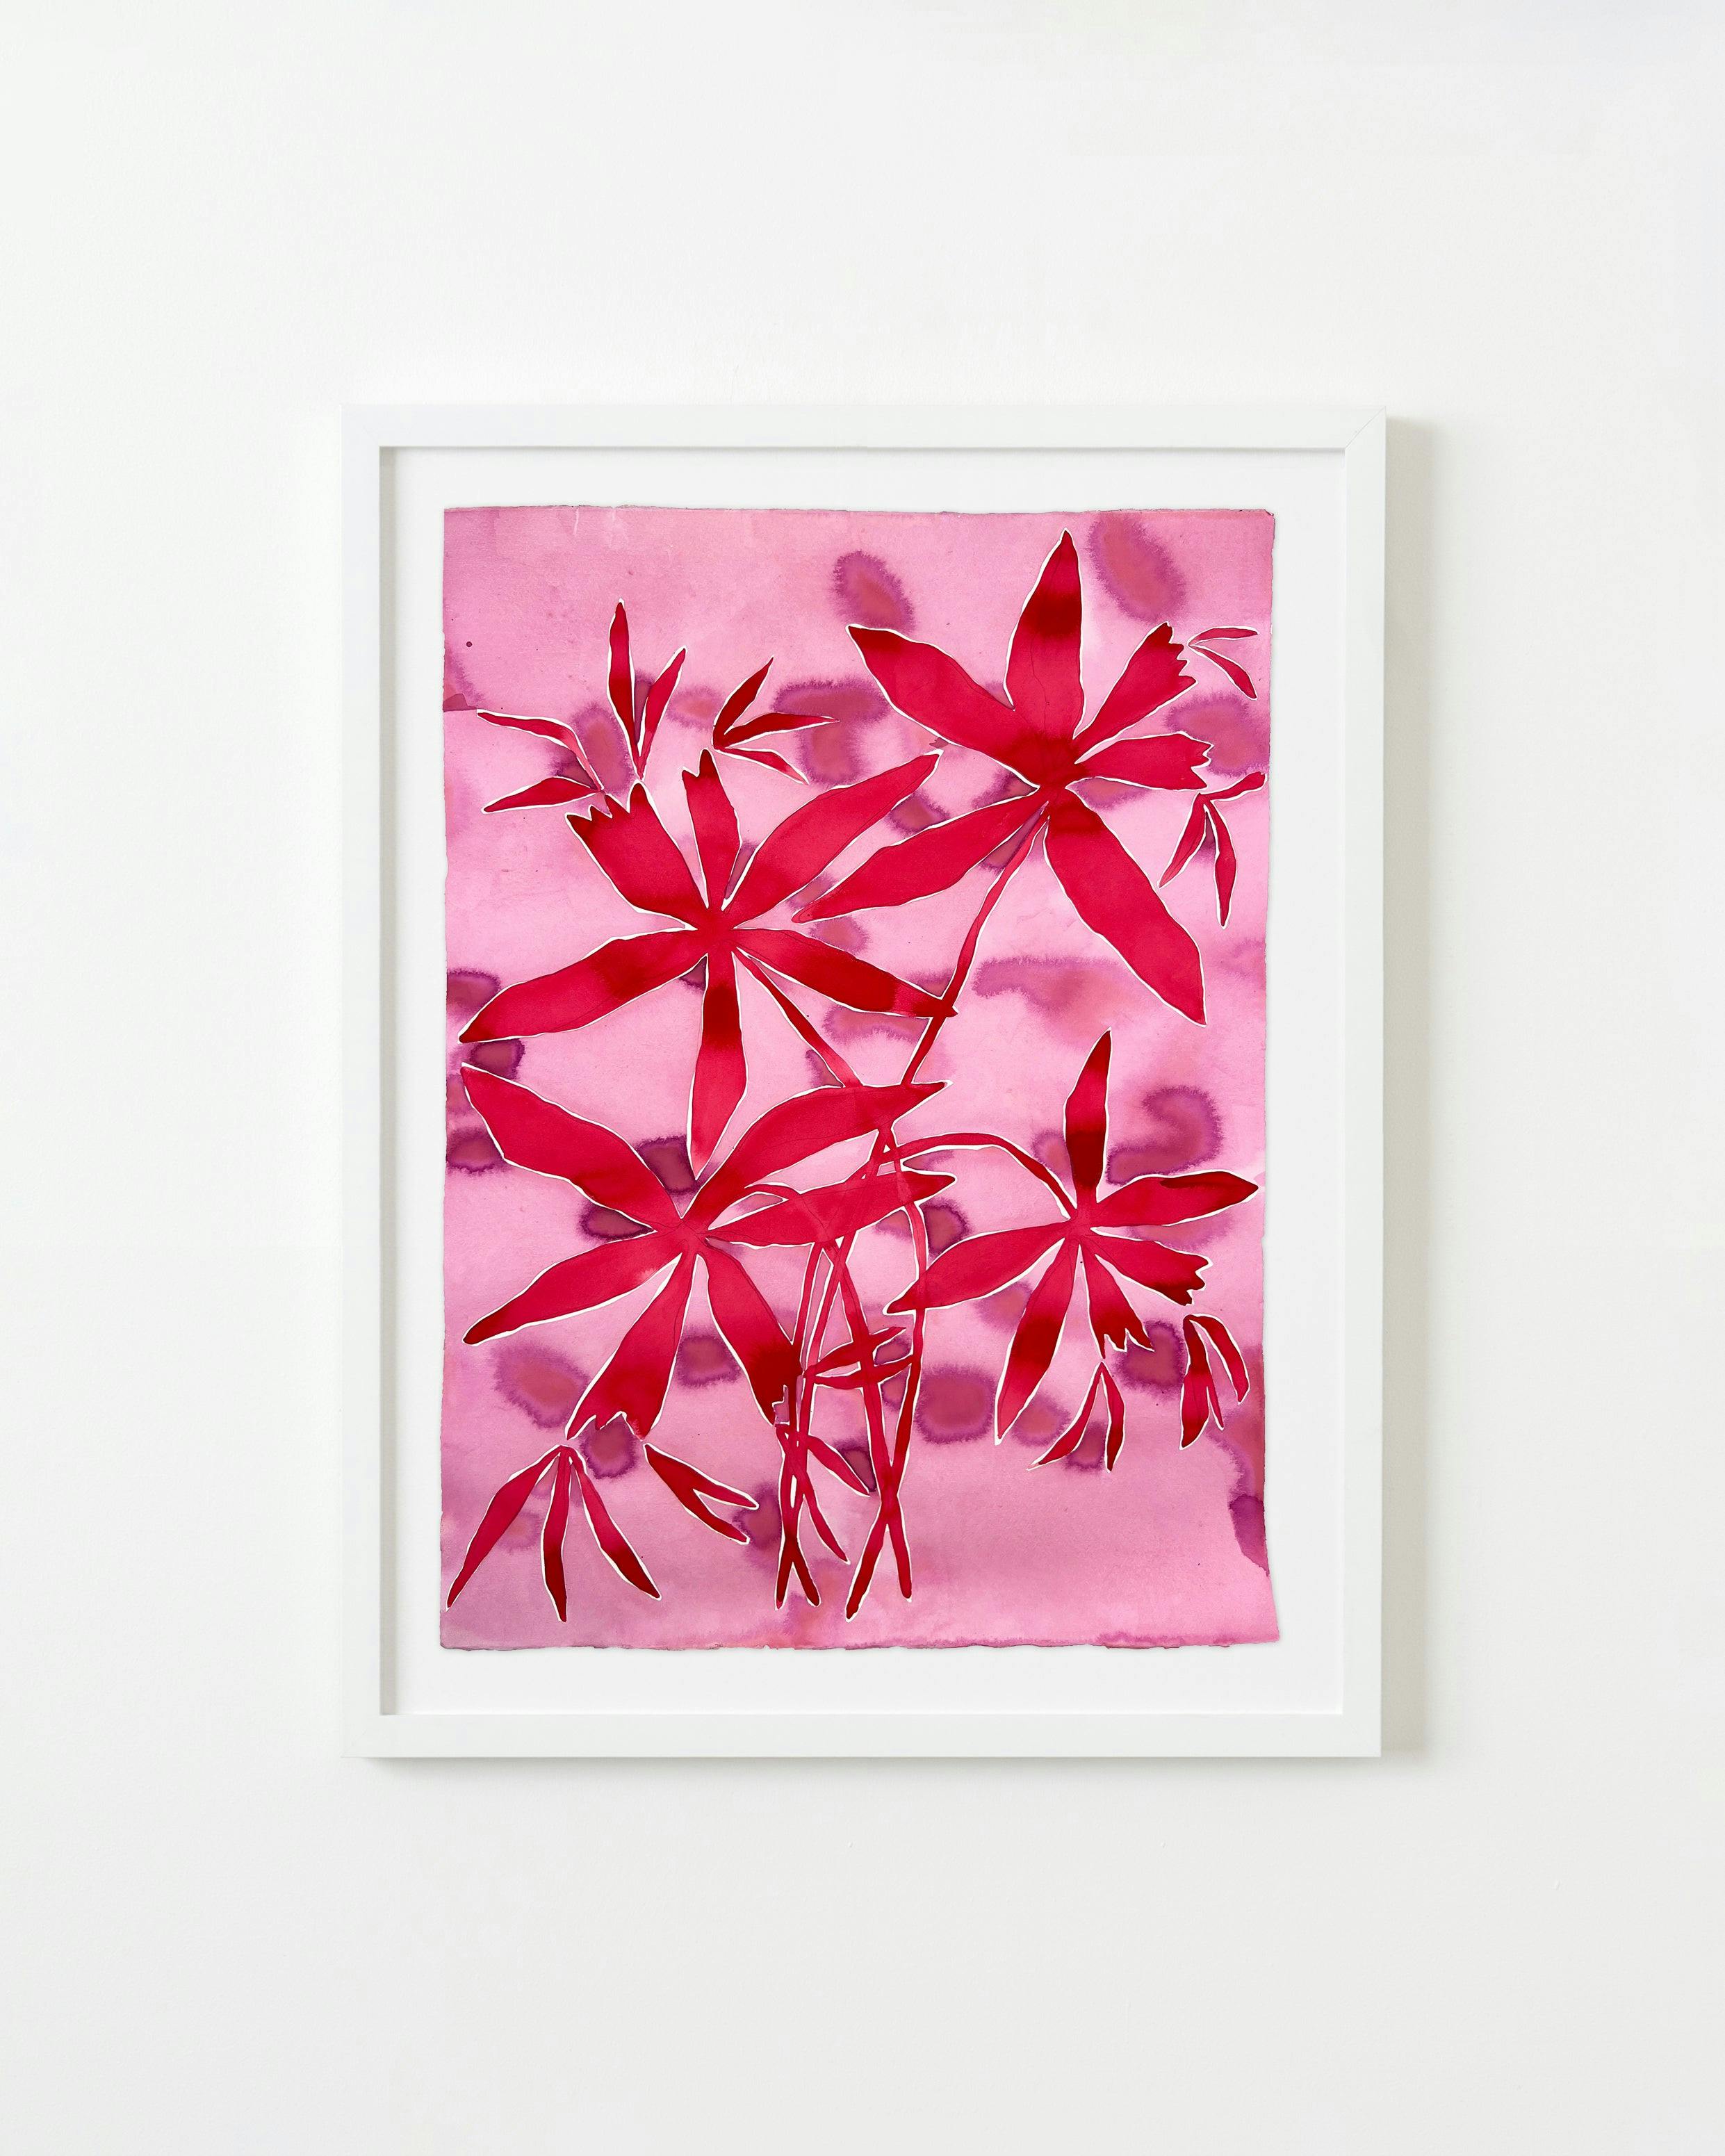 Painting by Kate Roebuck titled "Firecracker Plant".